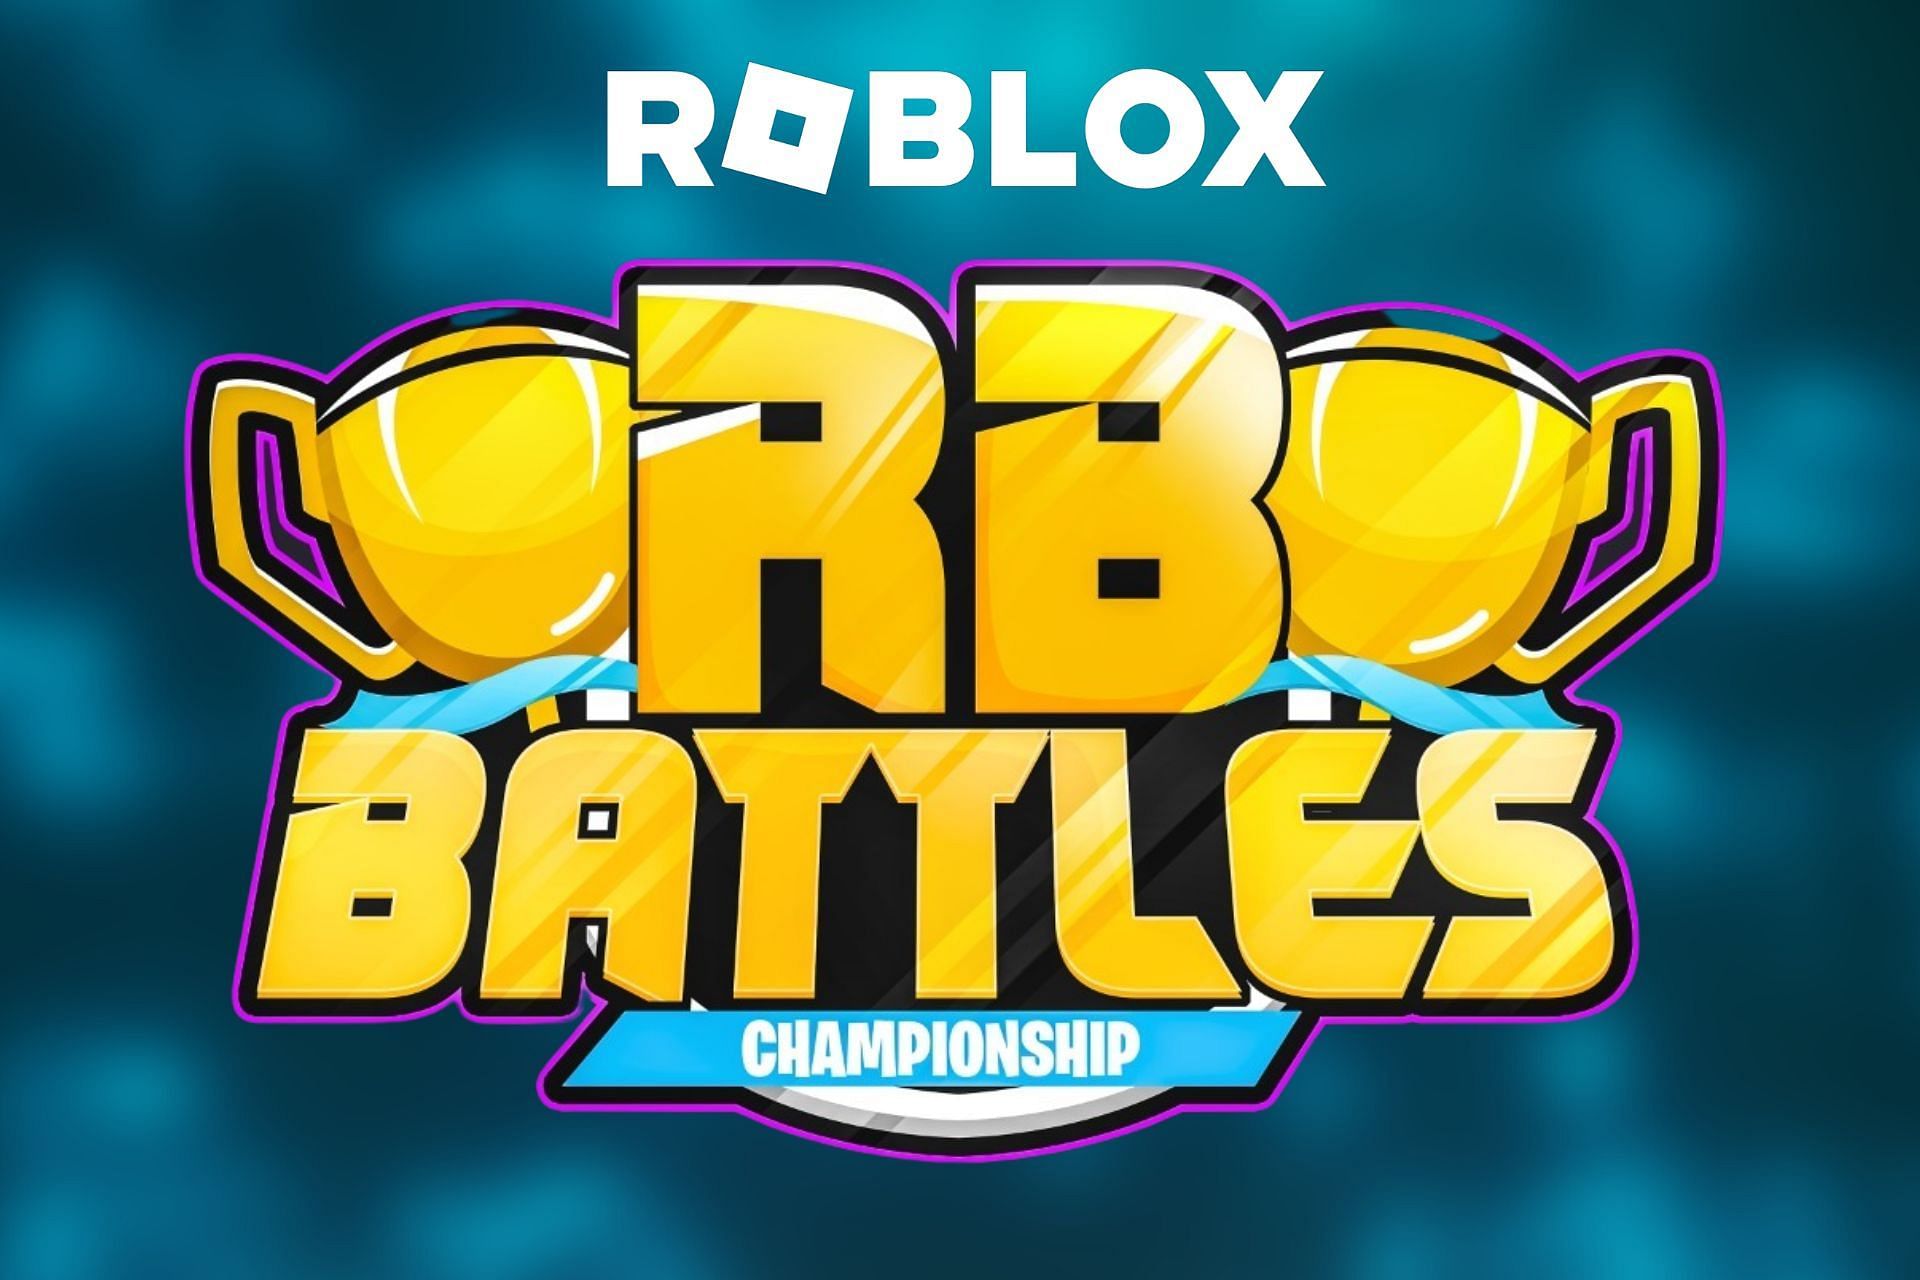 The official logo of RB Battles Champions